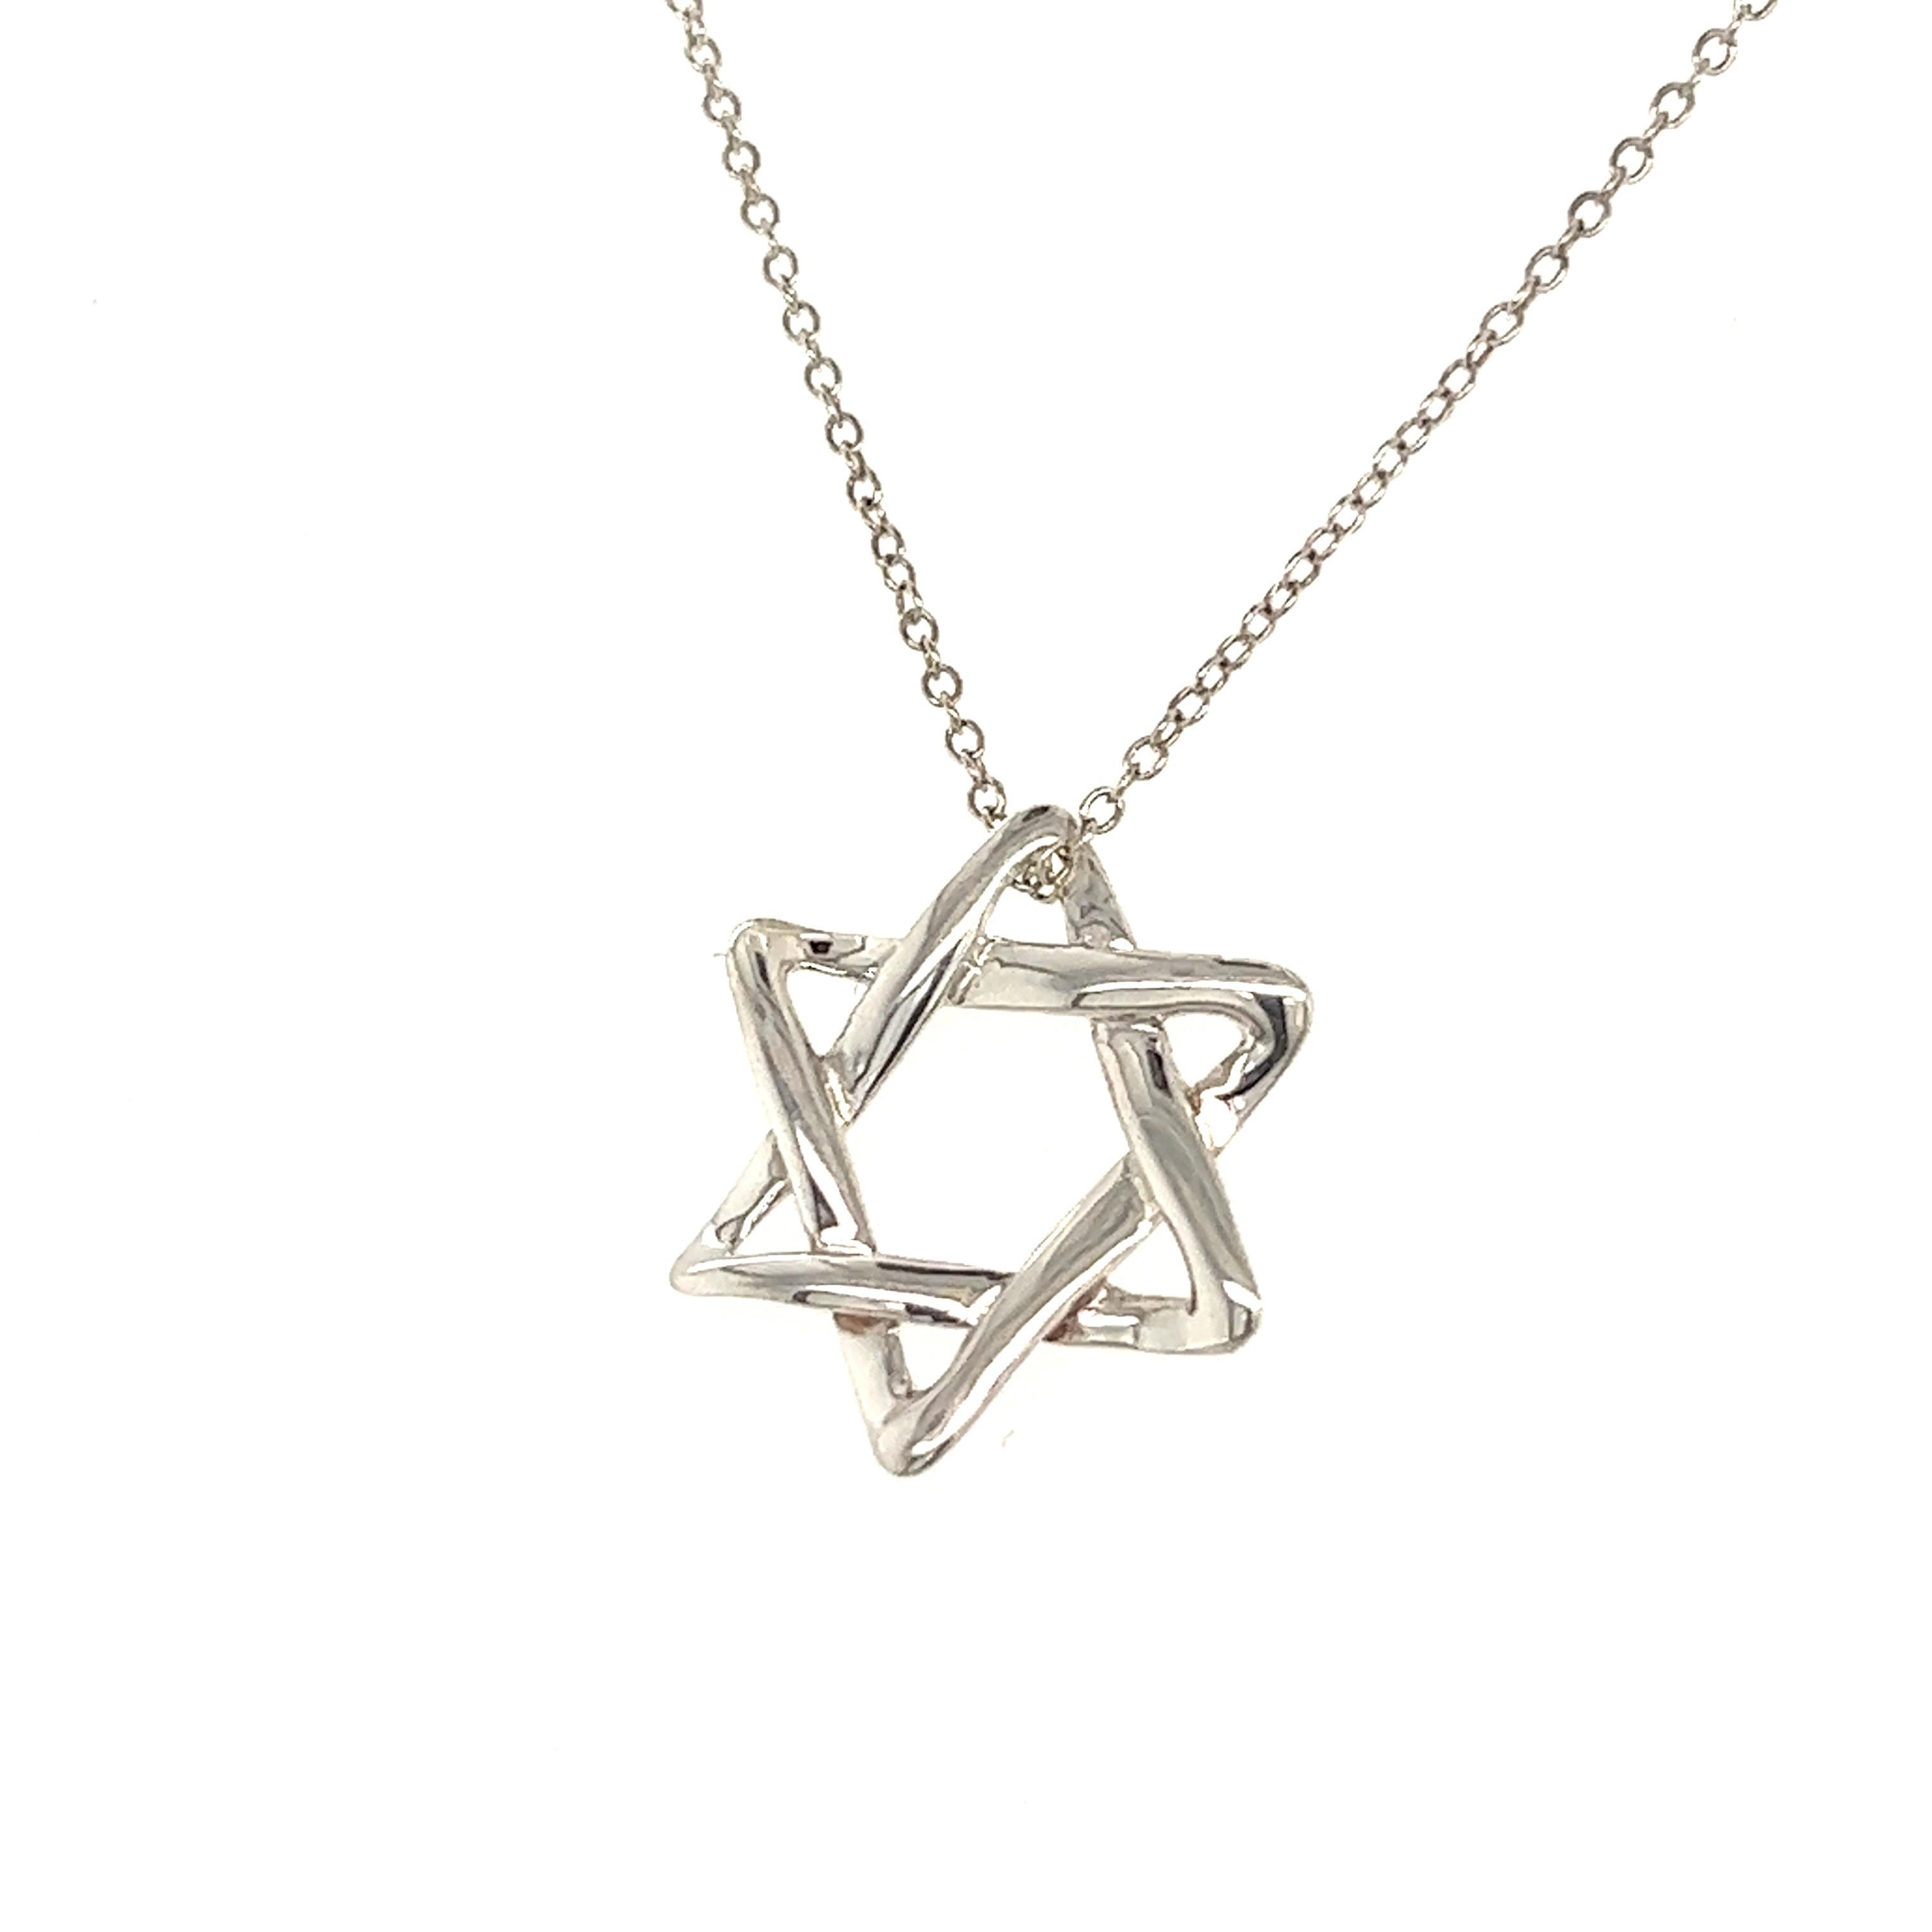 Near MINT TIFFANY & Co. Star of David Sterling Silver Necklace Pendant with  Box | eBay